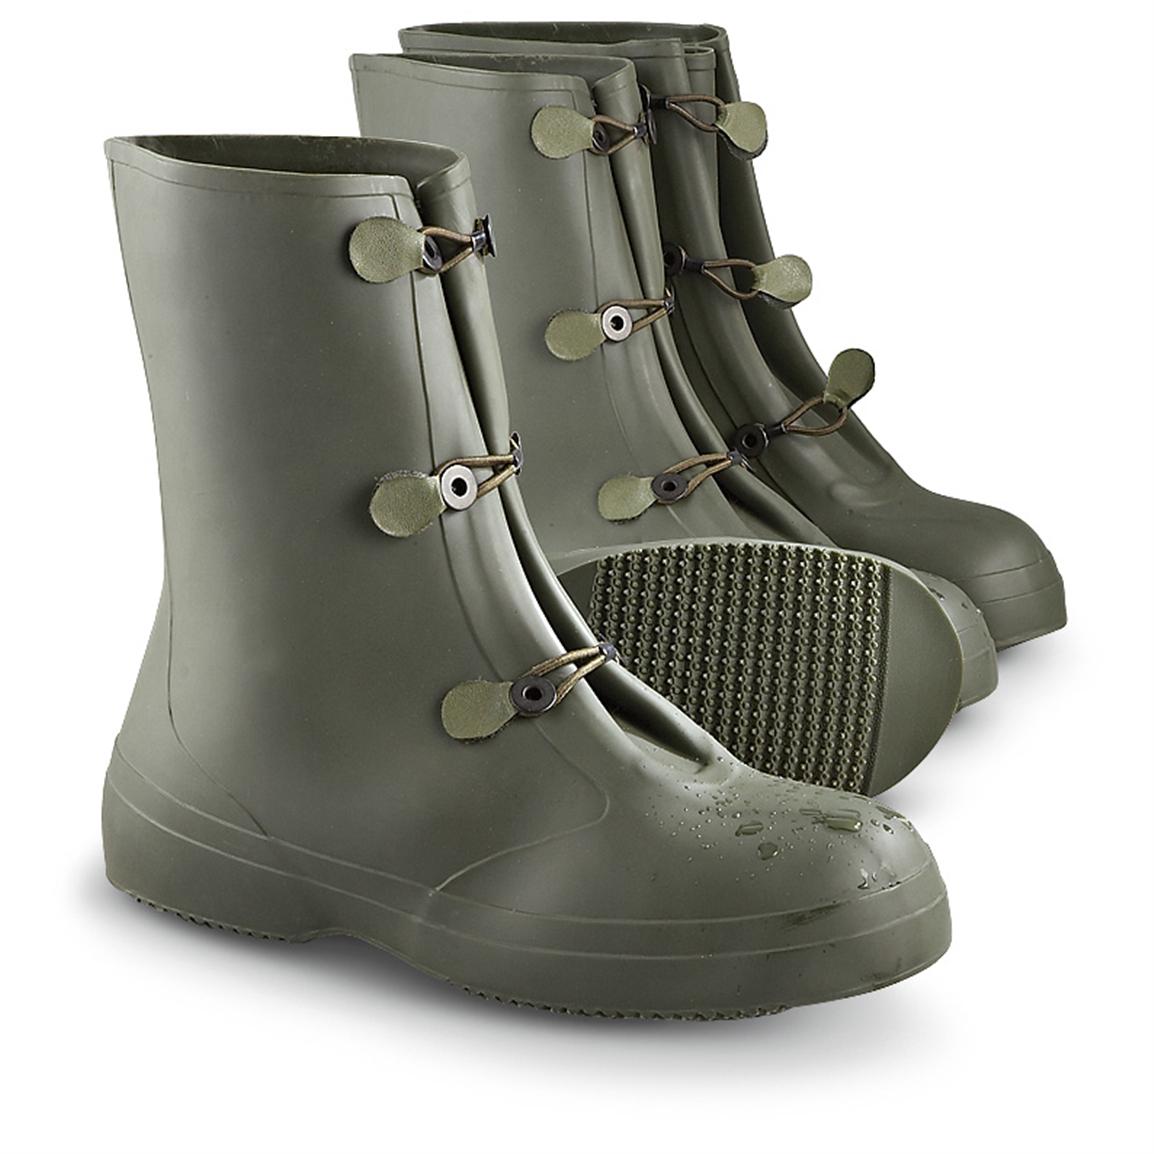 New Men's U.S. Military Overboots, Olive Drab - 150244, Winter ...